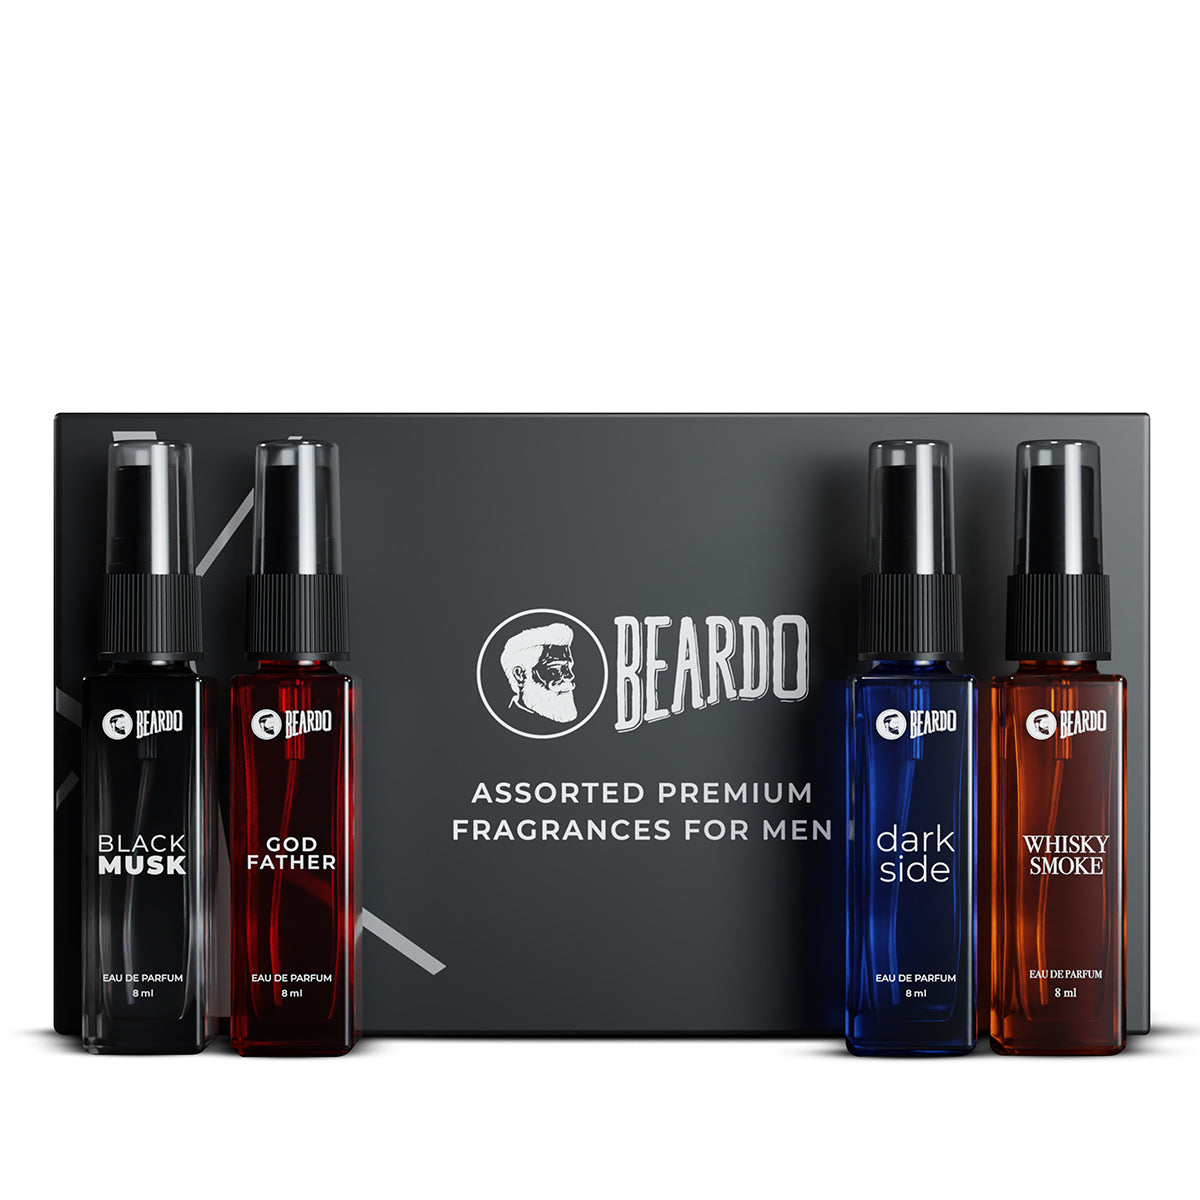 Shop Best Mens Day Gift Hampers Online With Perfume & Wine